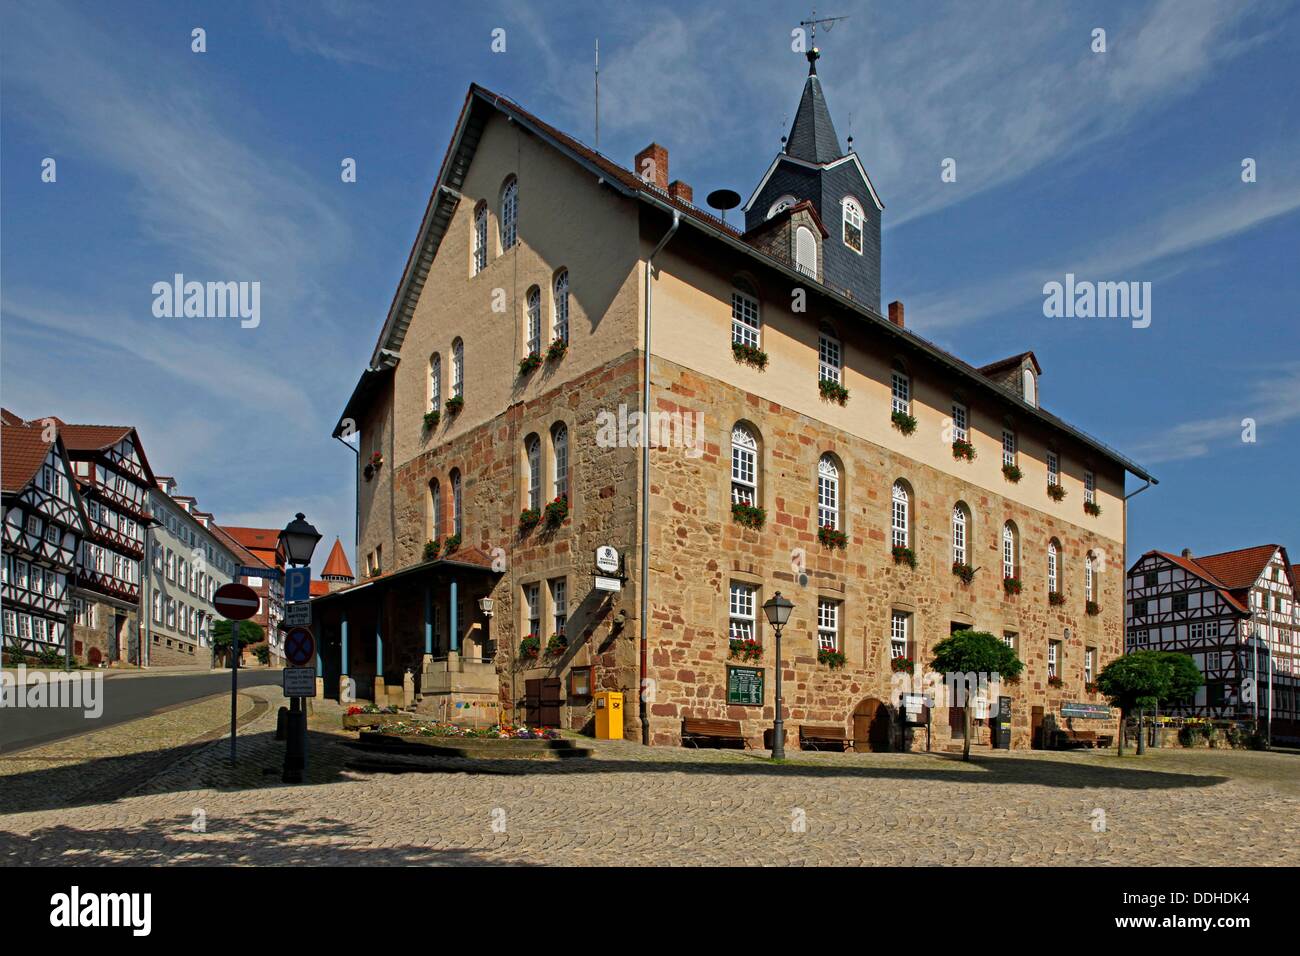 The town is known best of all for its Schloss Spangenberg, a castle built in 1253 and the town's landmark. Also worth seeing are the Town Hall and the half-timbered buildings in the Old Town and the remains of the town's old wall, several of whose towers a Stock Photo